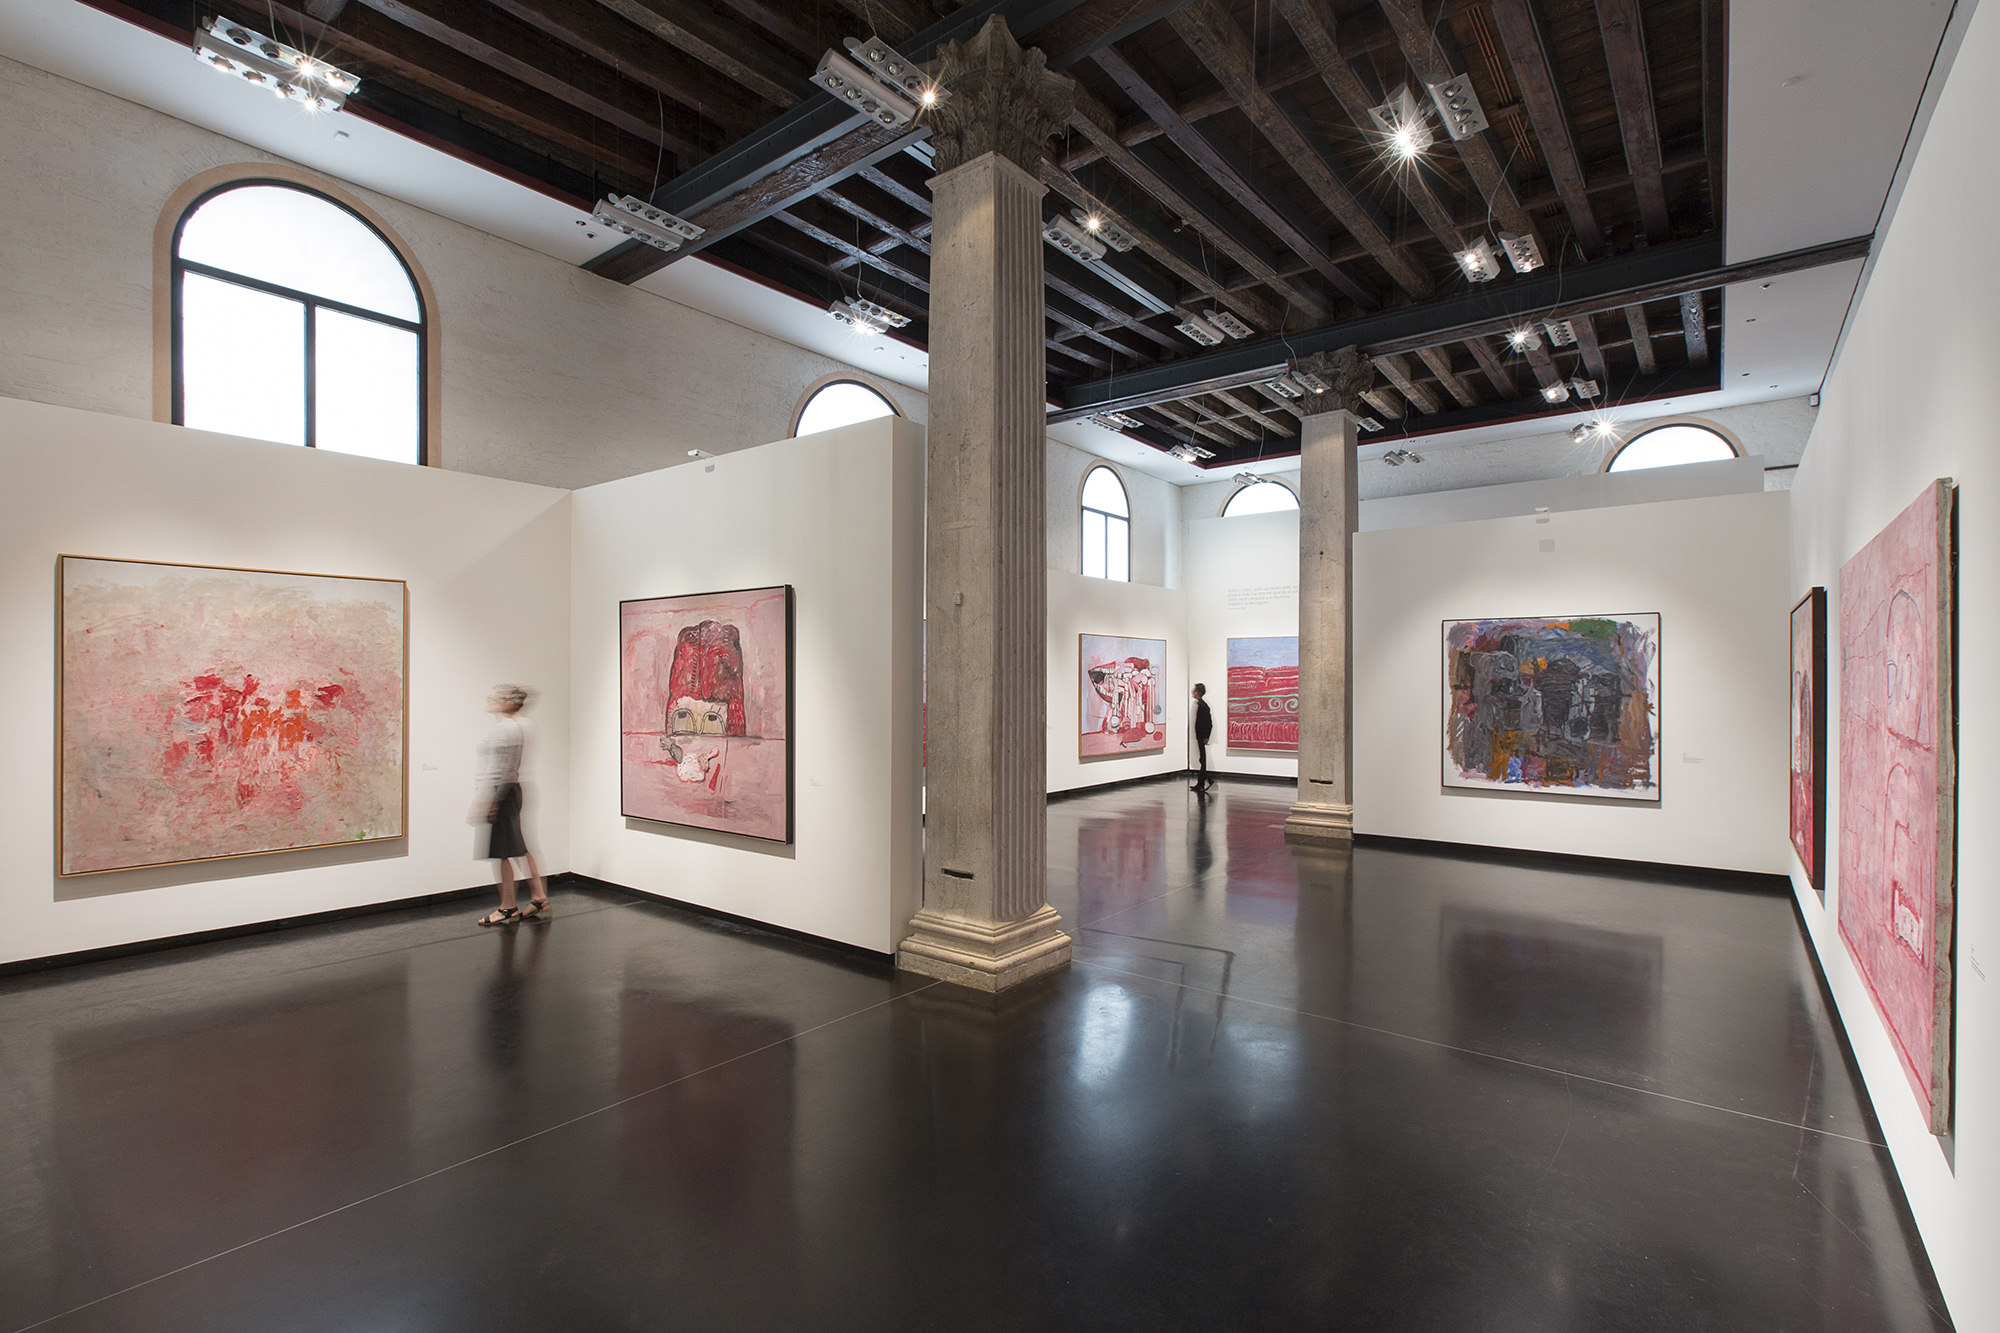 Philip Guston and The Poets. Exhibition view at Gallerie dell\